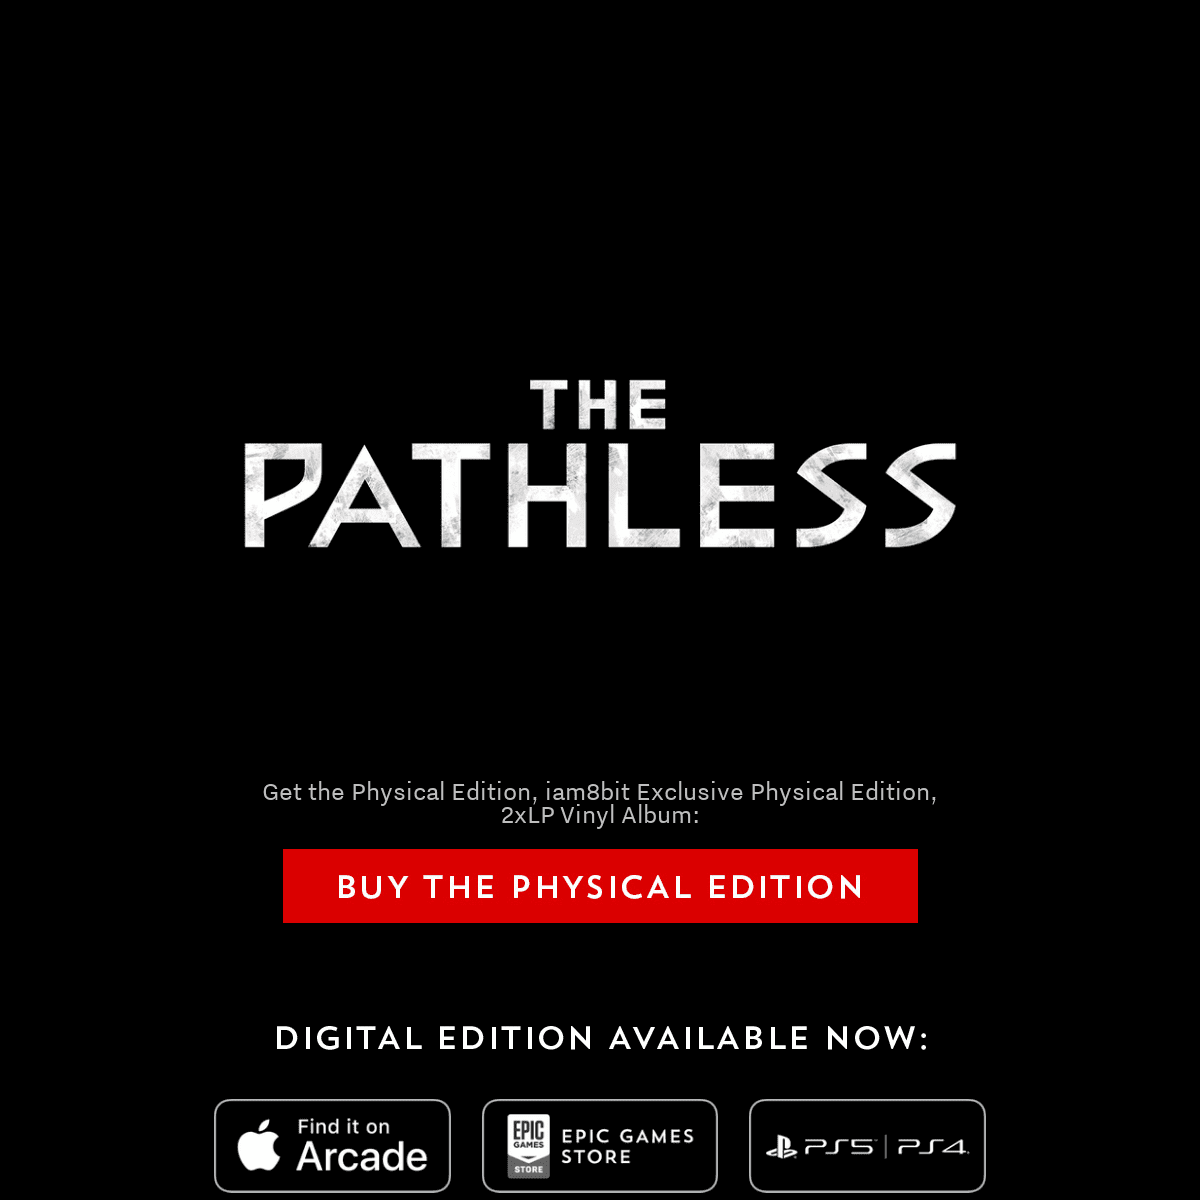 A complete backup of https://thepathless.com